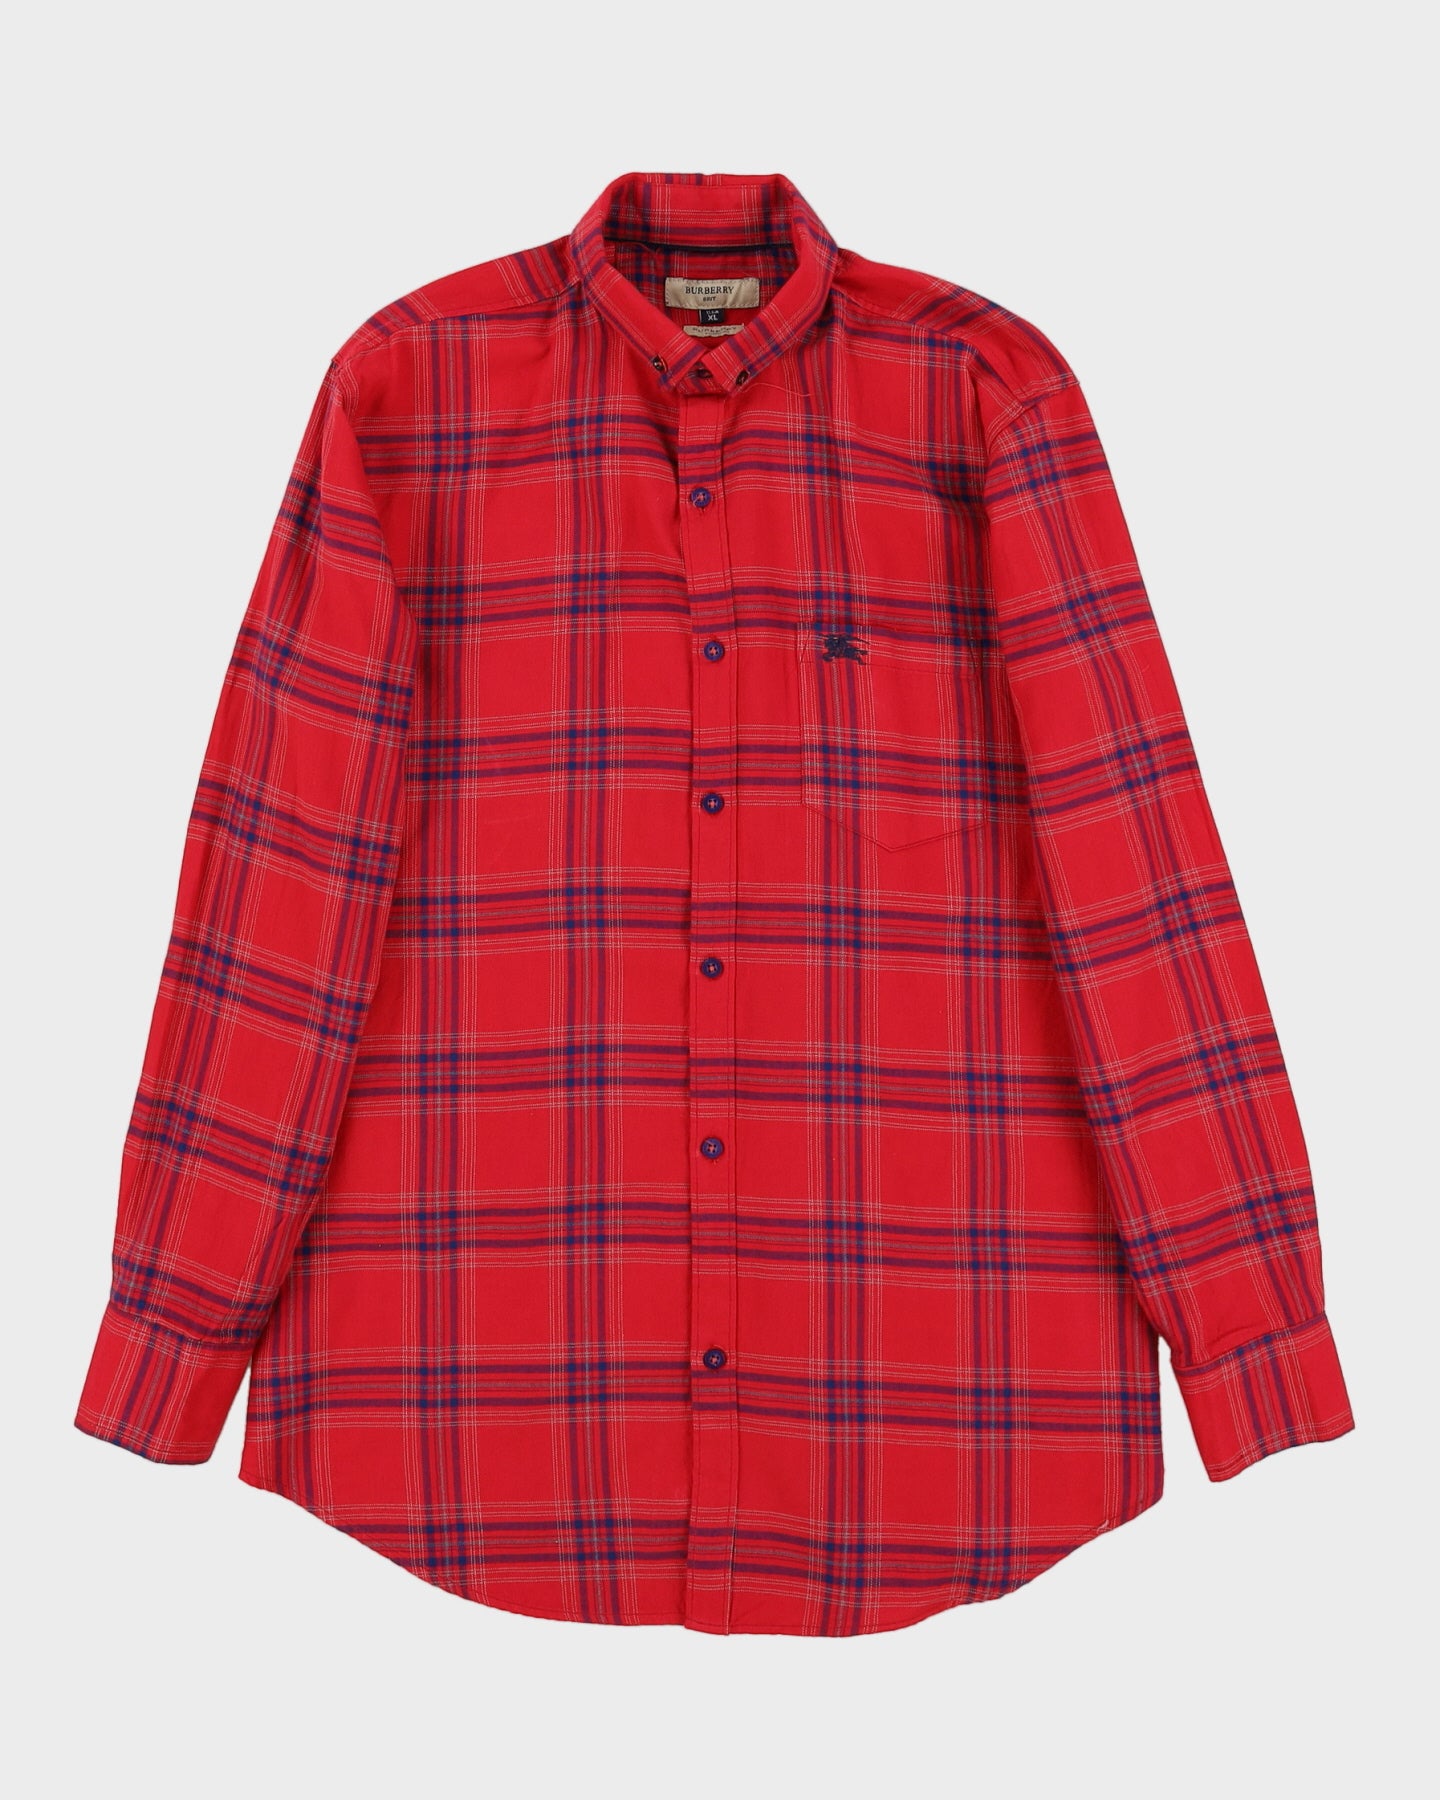 Burberry Brit Red Checked Shirt - L / XL